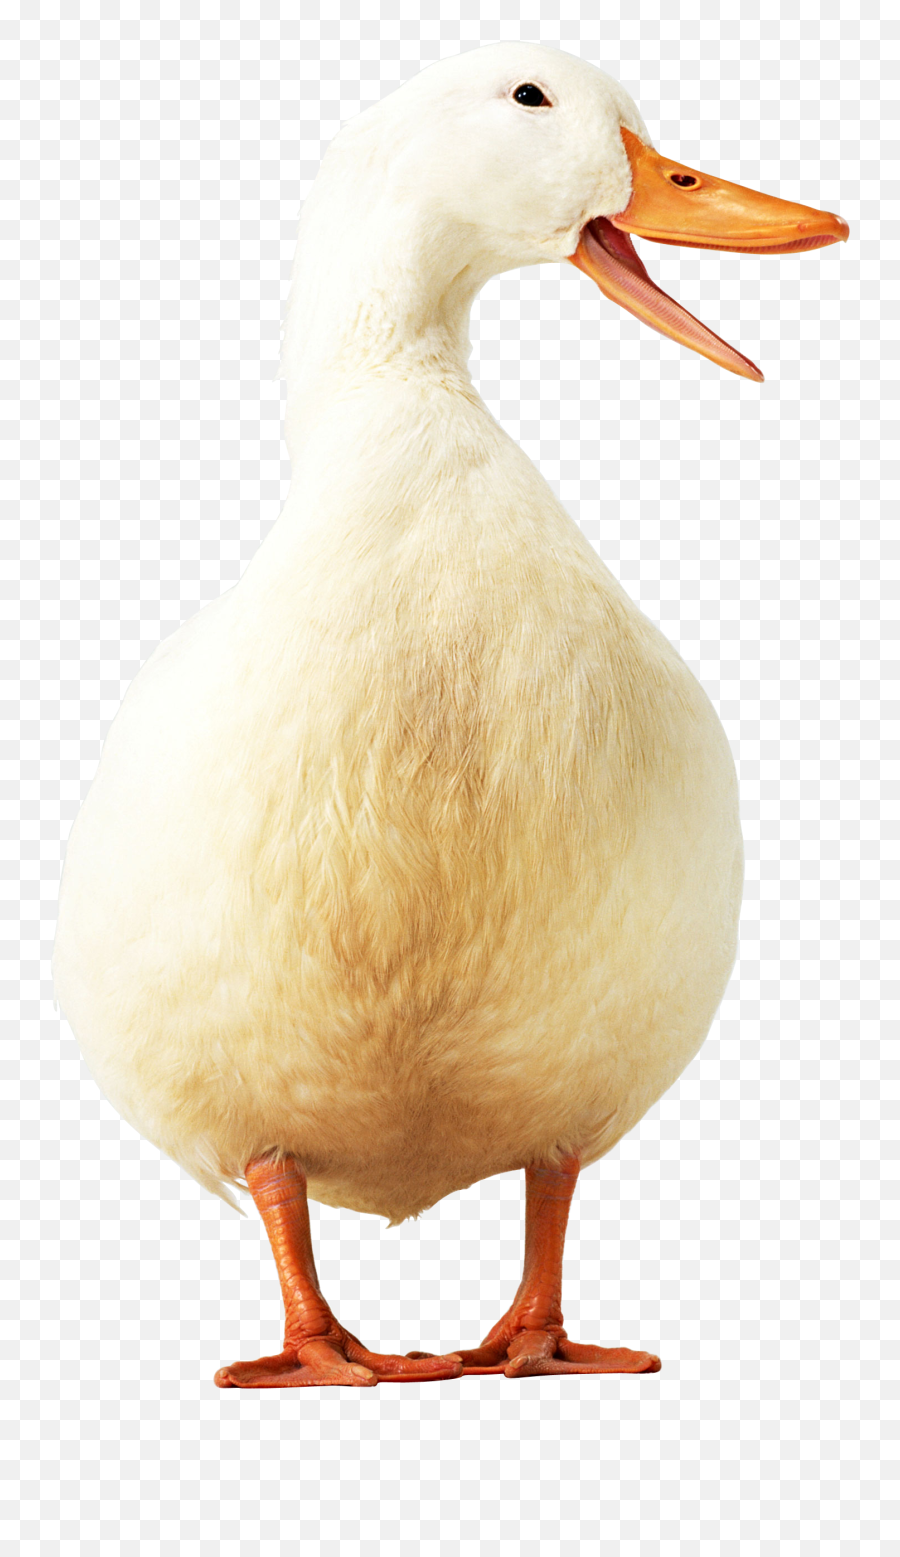 Duck Png Image Free Download - Duck,Duck Png